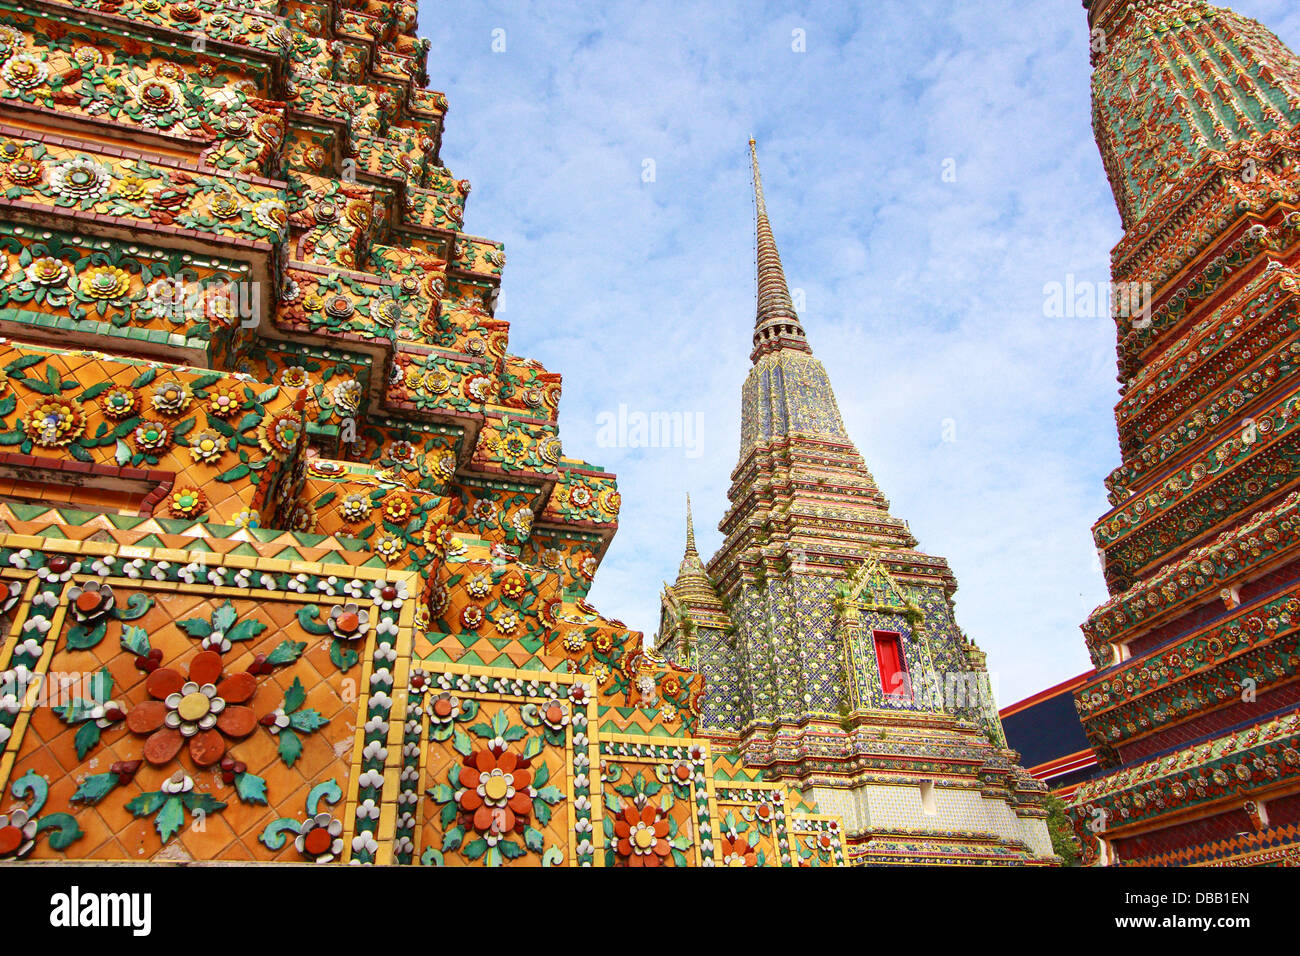 Wat Pho, Bangkok, Thailand. 'Wat' means temple in Thai. The temple is one of Bangkok's most famous tourist sites. Stock Photo